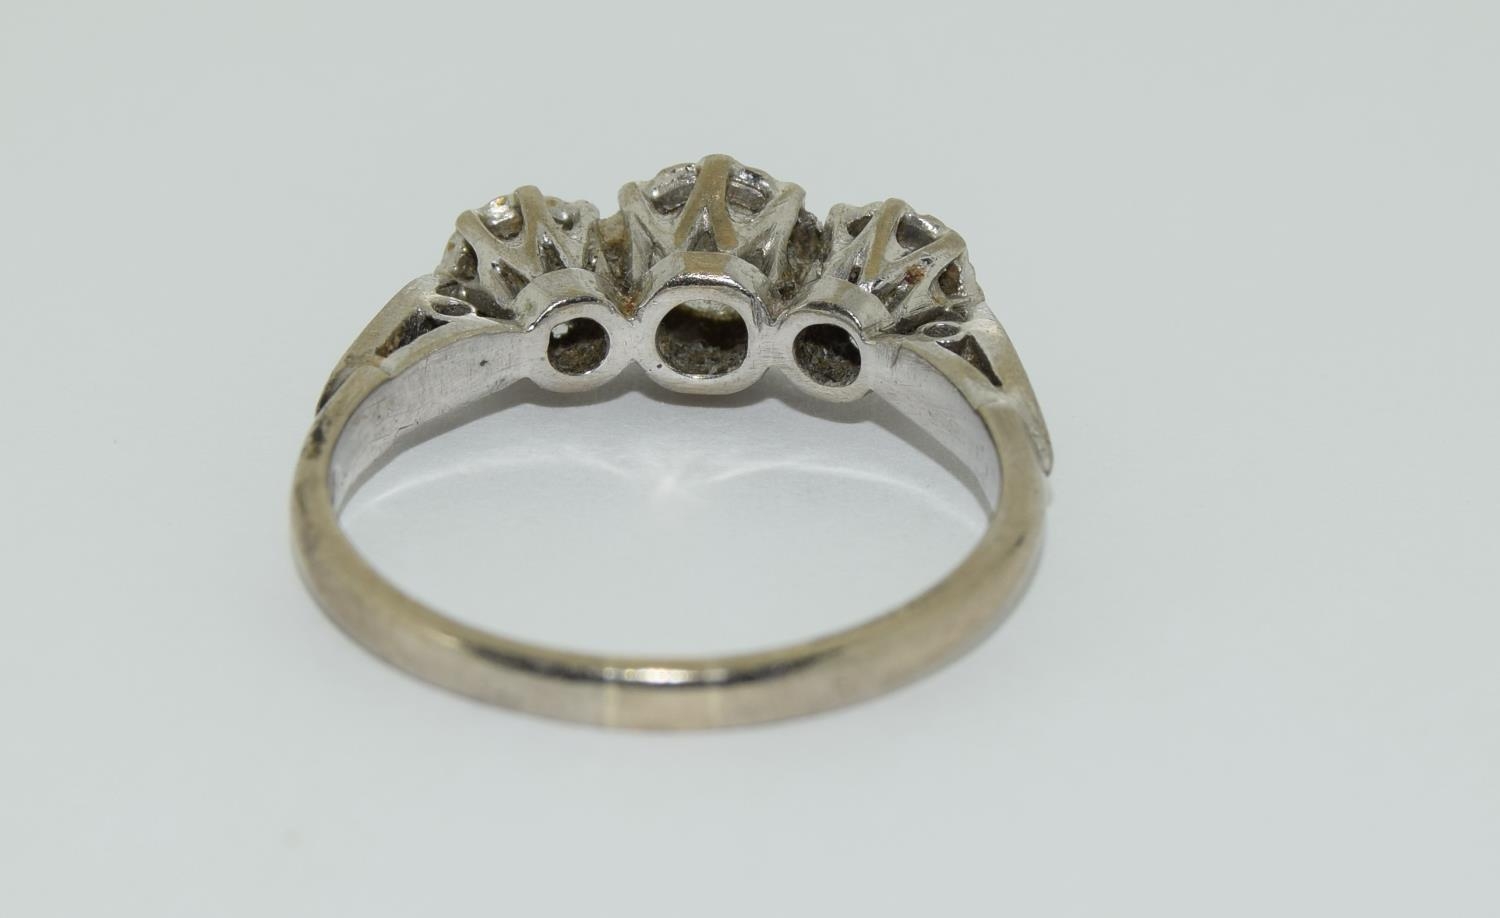 18ct white gold ladies three stone diamond ring, 80 points approx. - Image 3 of 6